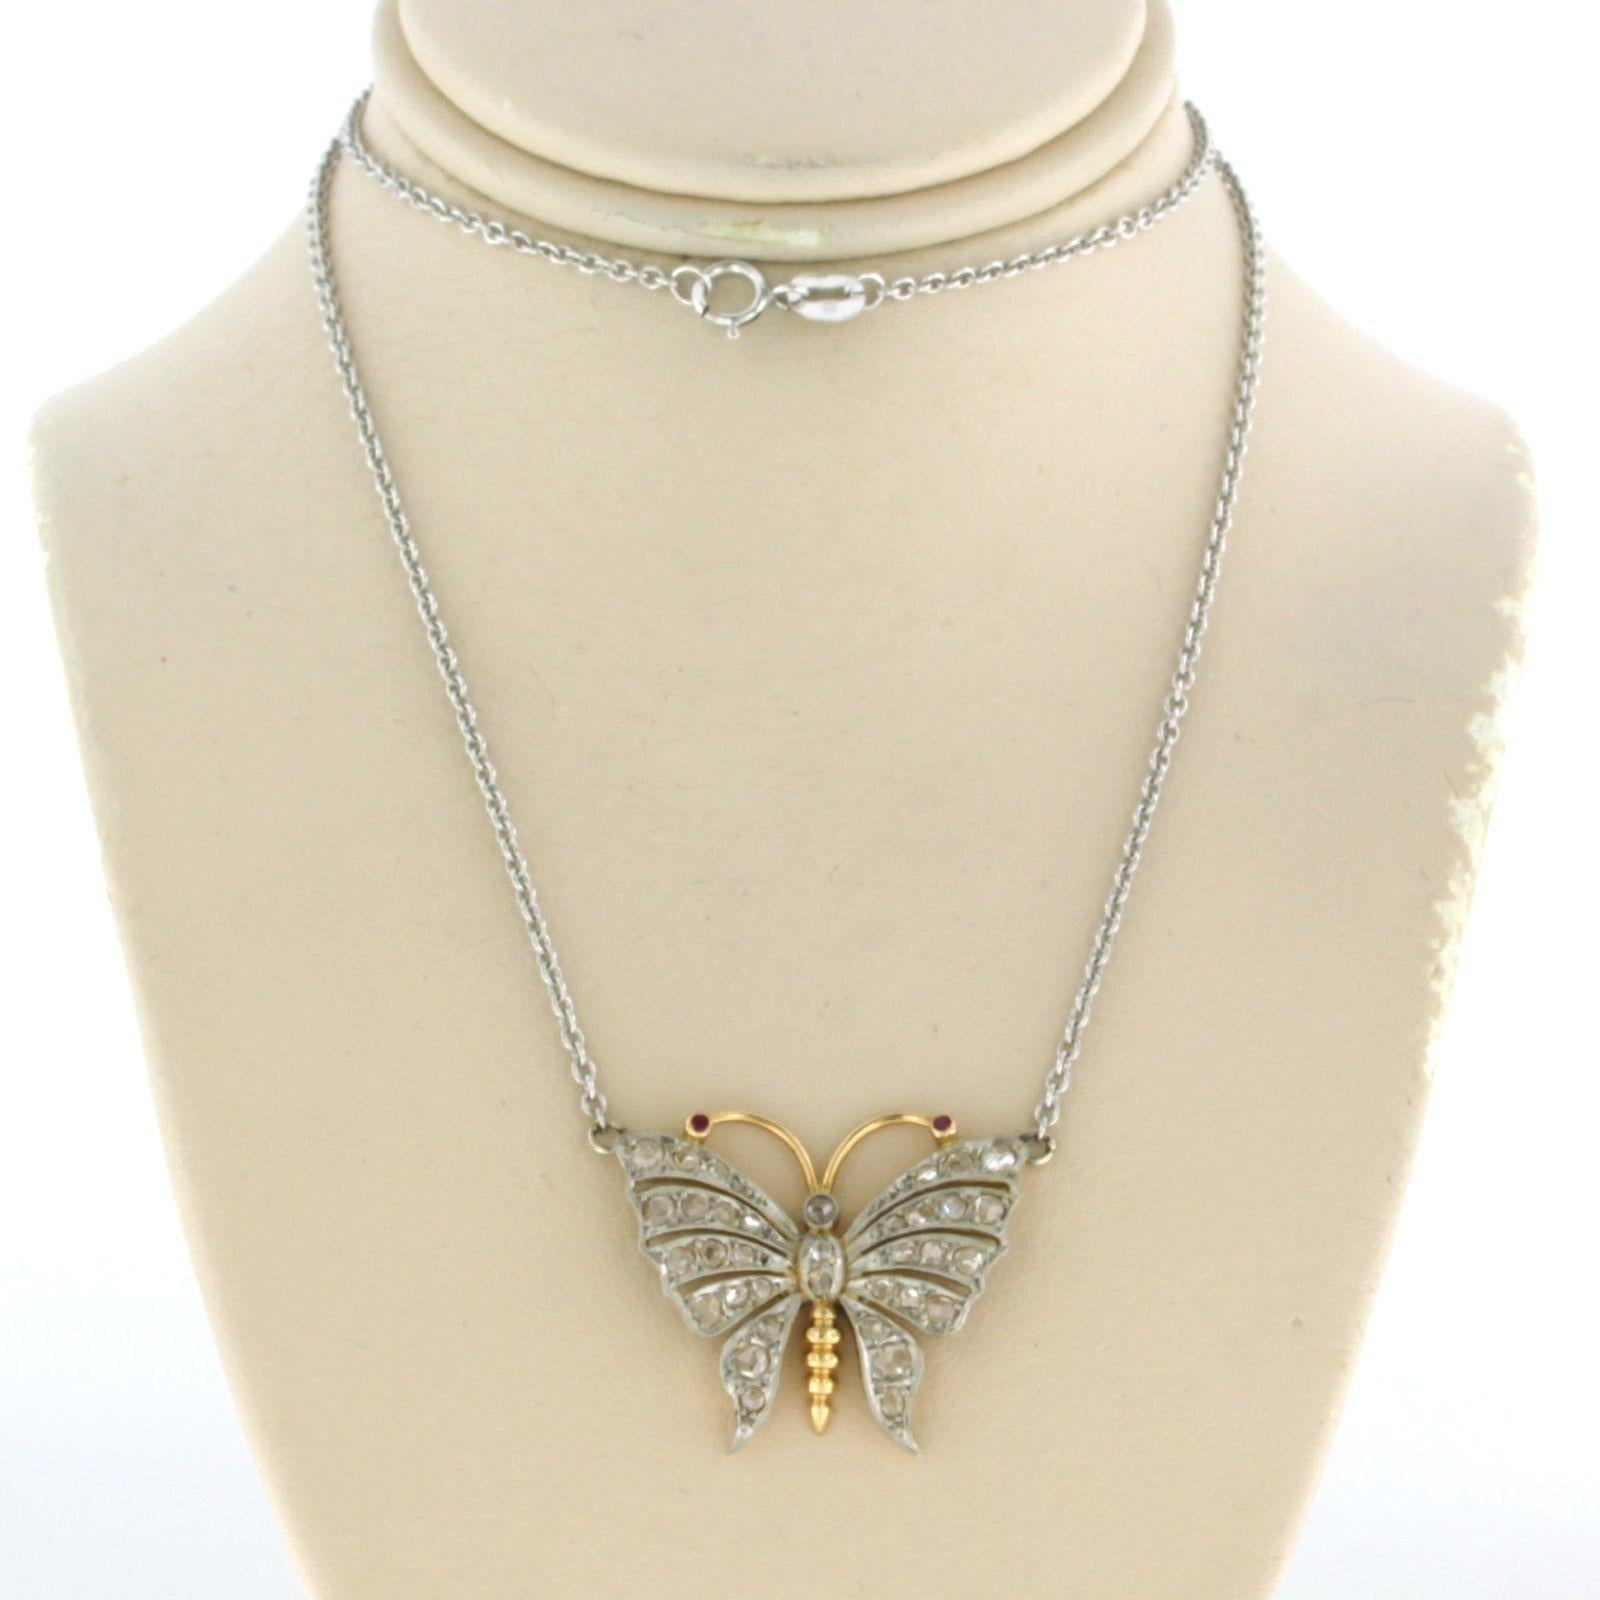 platinum necklace with gold and platinum in a butterfly shape set with rose cut diamond up to 0.50ct/ 45 cm

detailed description

The size of the center piece is 2.8 cm wide by 2.1 cm high

necklace is 1.3 mm wide

weight 7.8 grams

set with

- 2 x